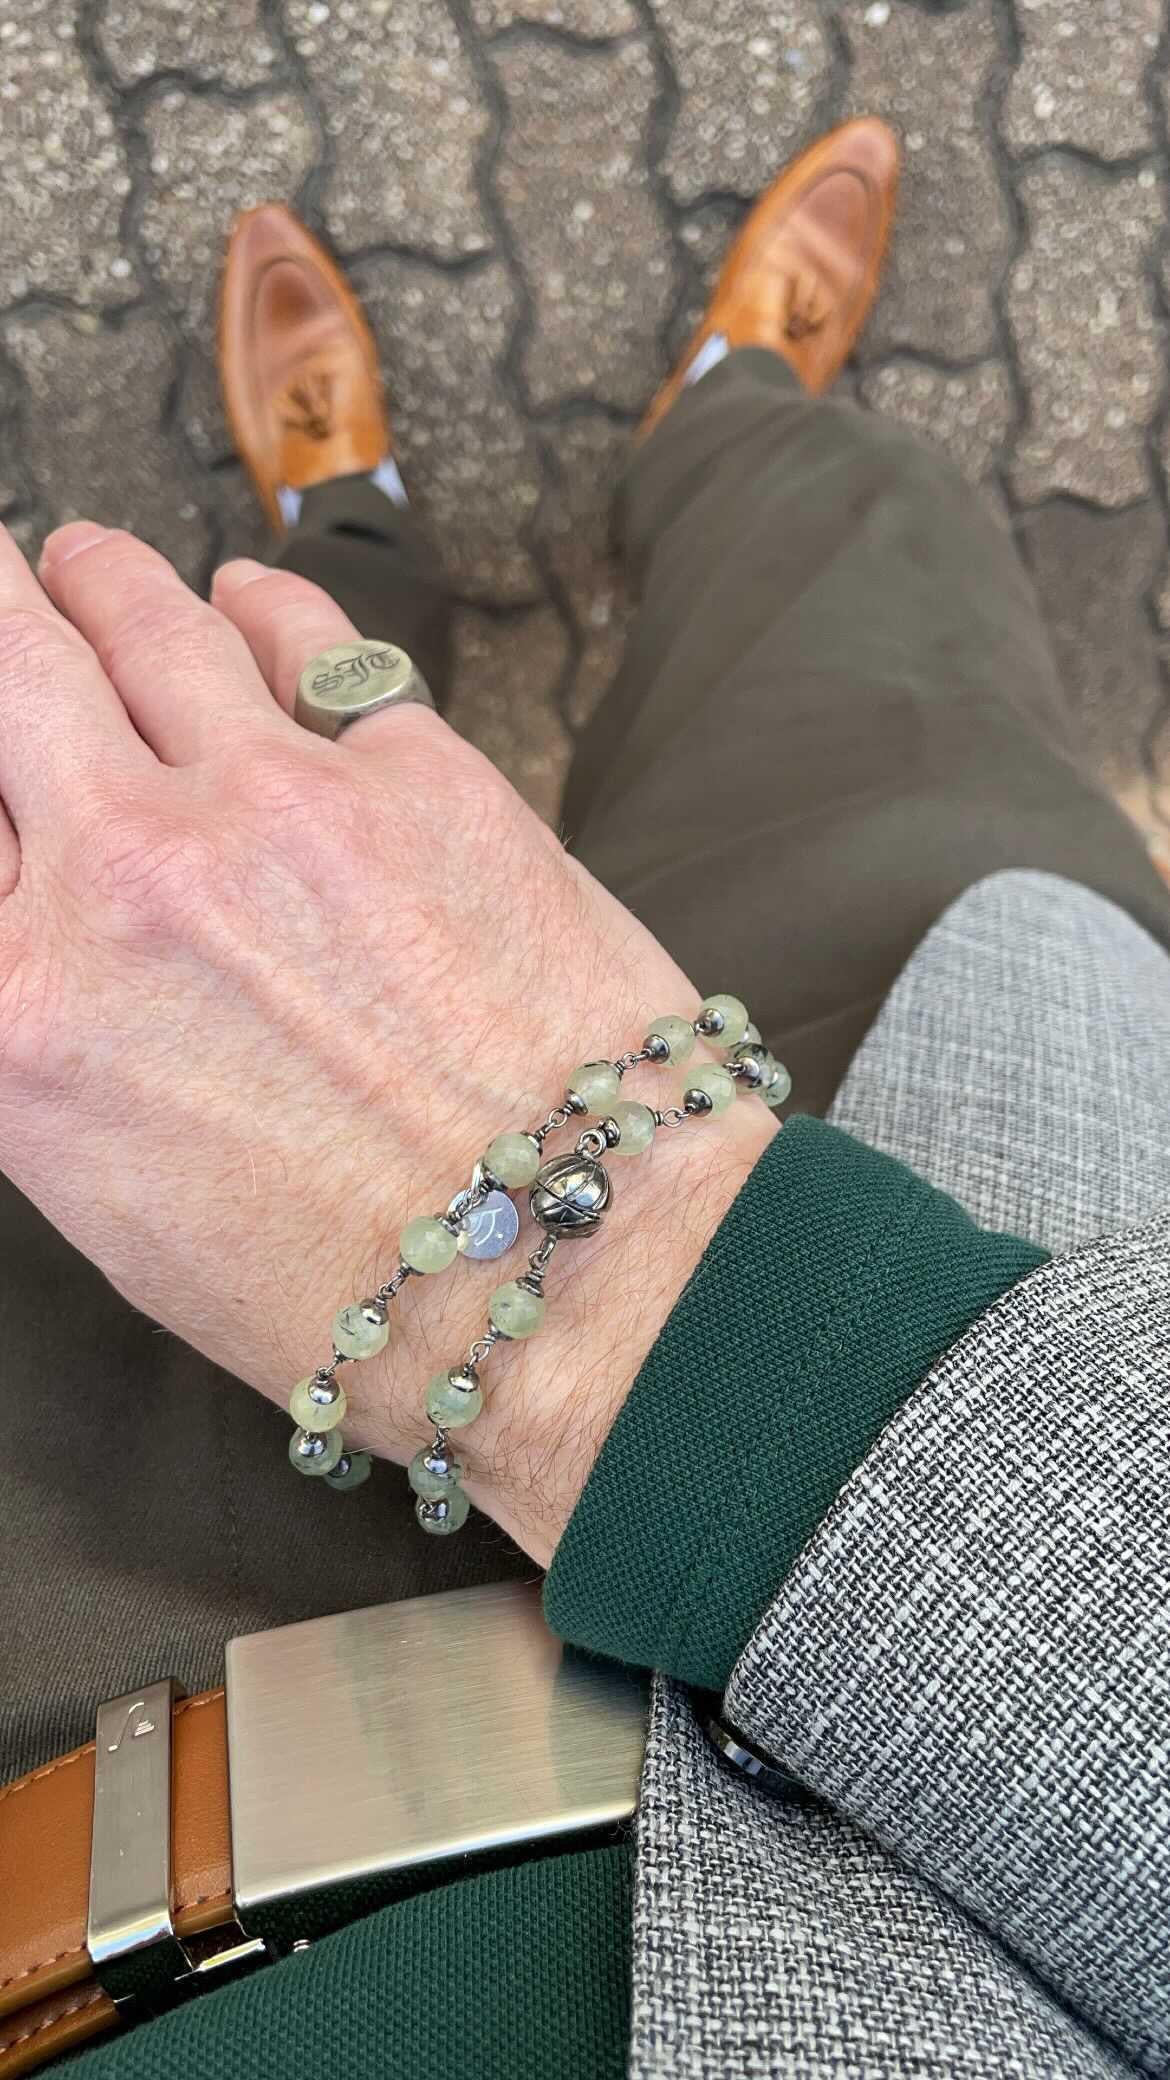 Story Behind the Jewelry
A unique and intriguing gemstone, Prehnite adds a fresh green glow to any piece of jewelry. The bracelet is a wrap around style and is adorned with a pyrite skull and a magnetic clasp for ease and convenience.
Designed and